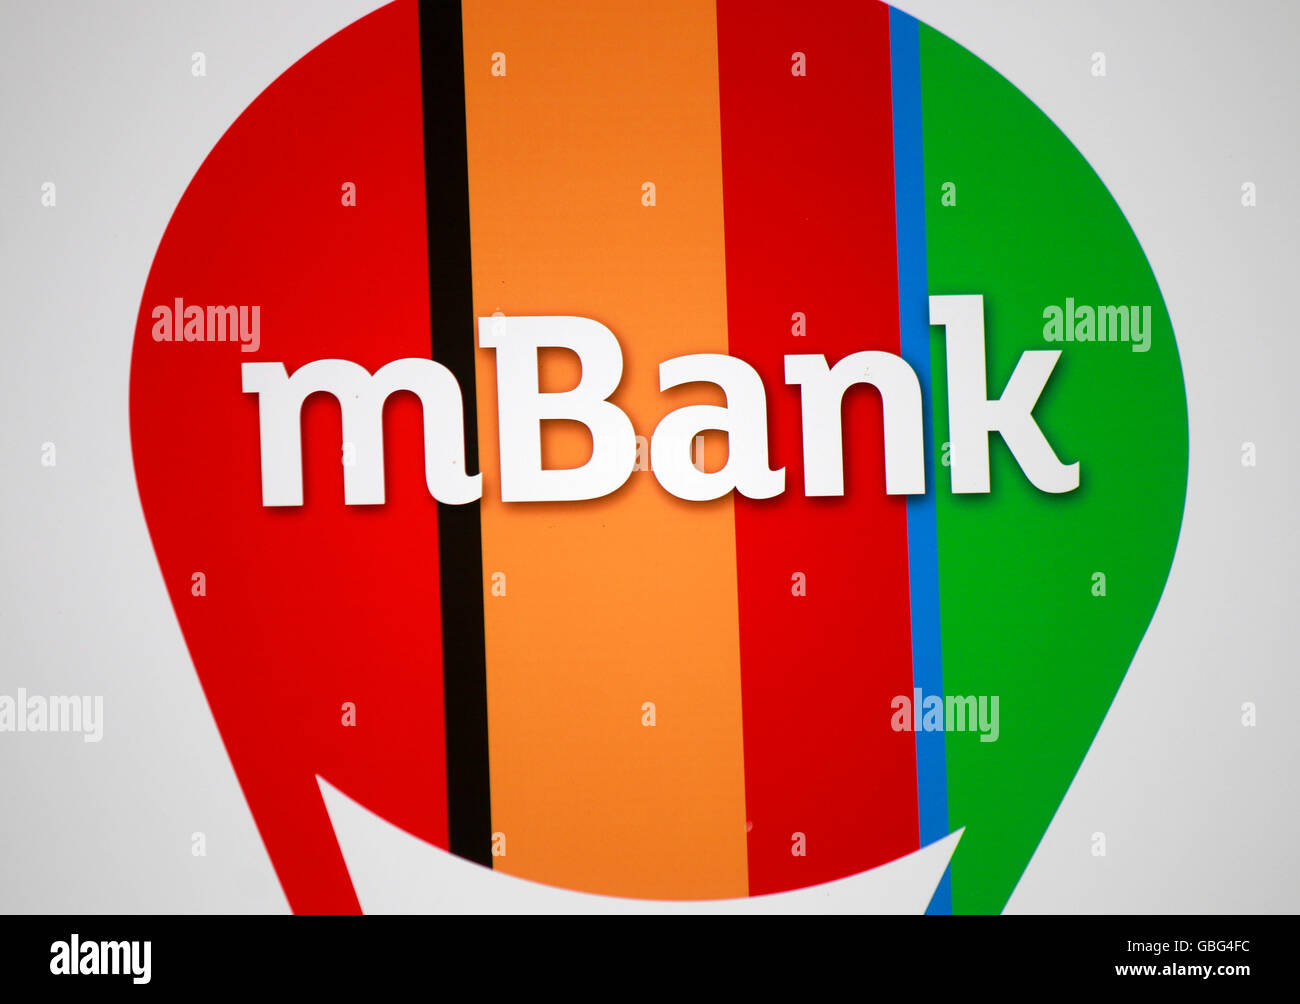 Mbank High Resolution Stock Photography and Images - Alamy